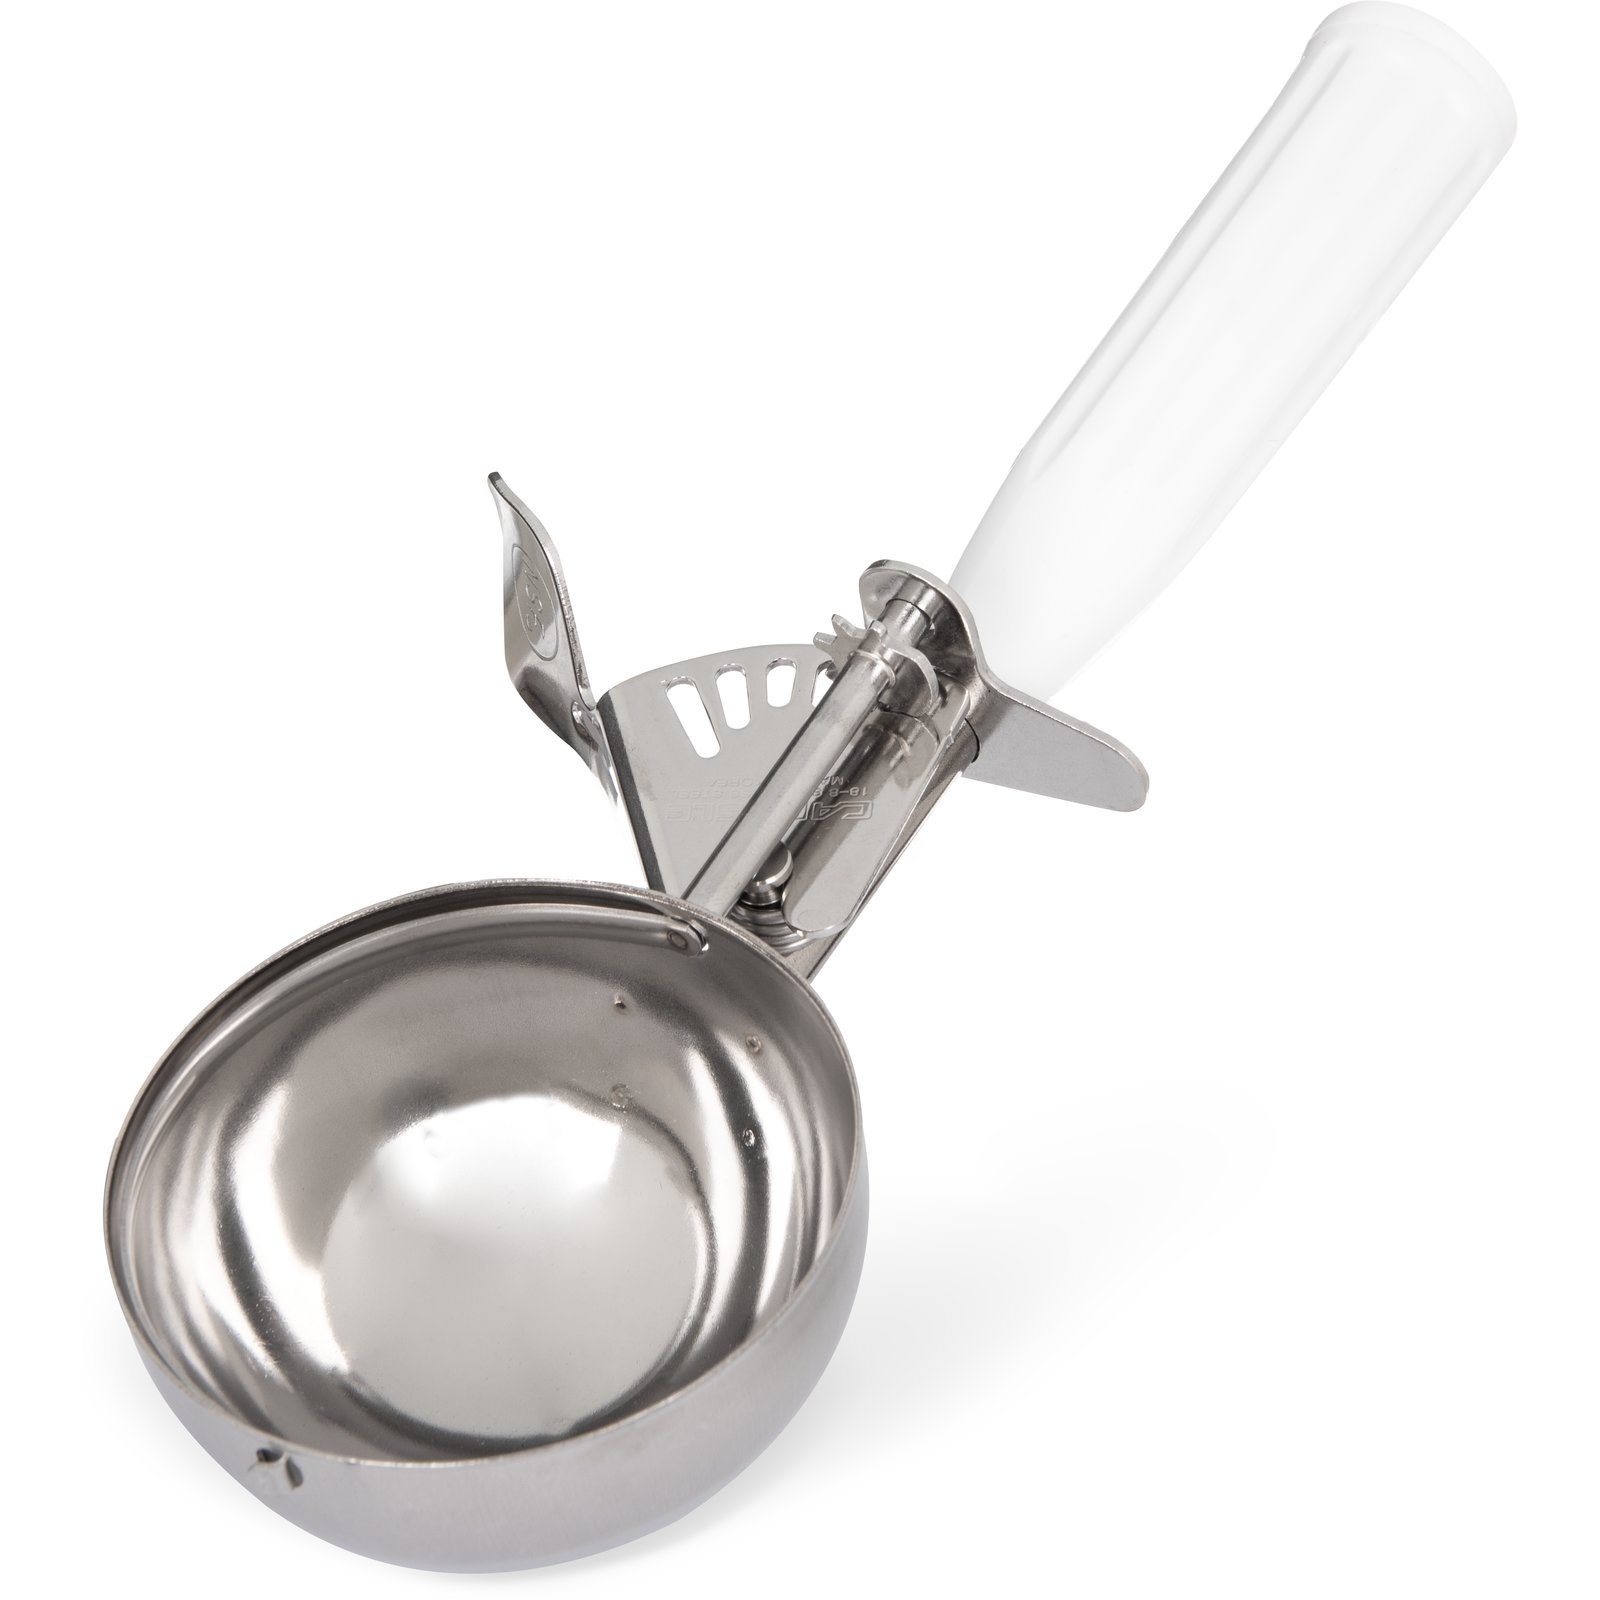 Stainless Steel Disher Scoop